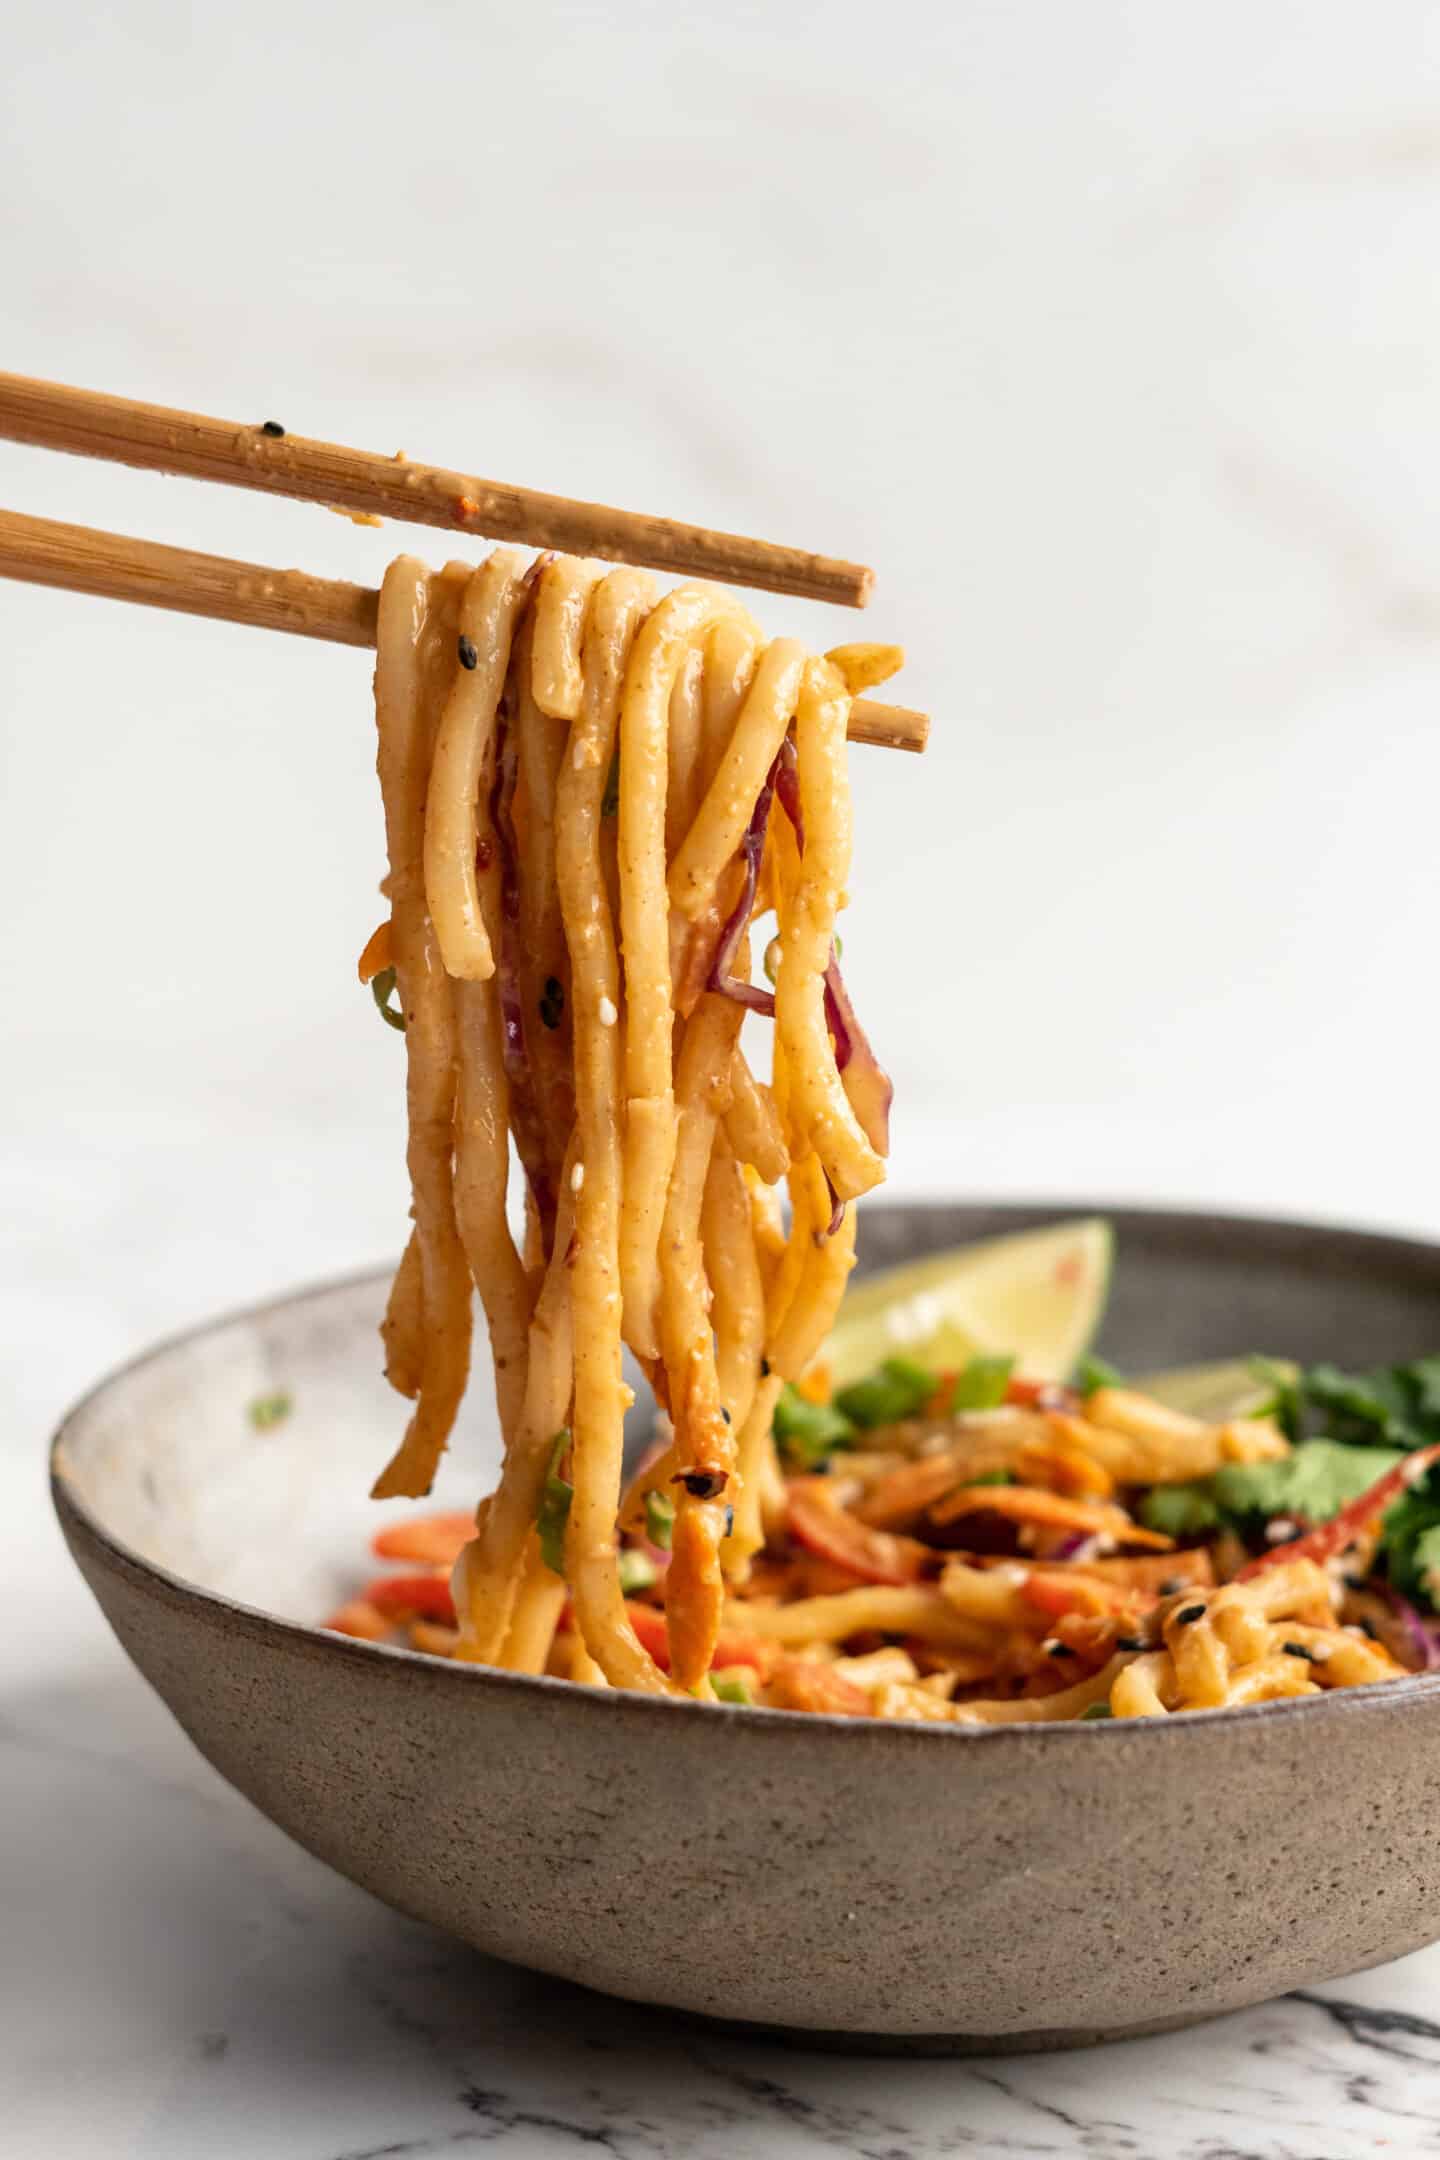 Thai peanut noodles being held with chopsticks above bowl